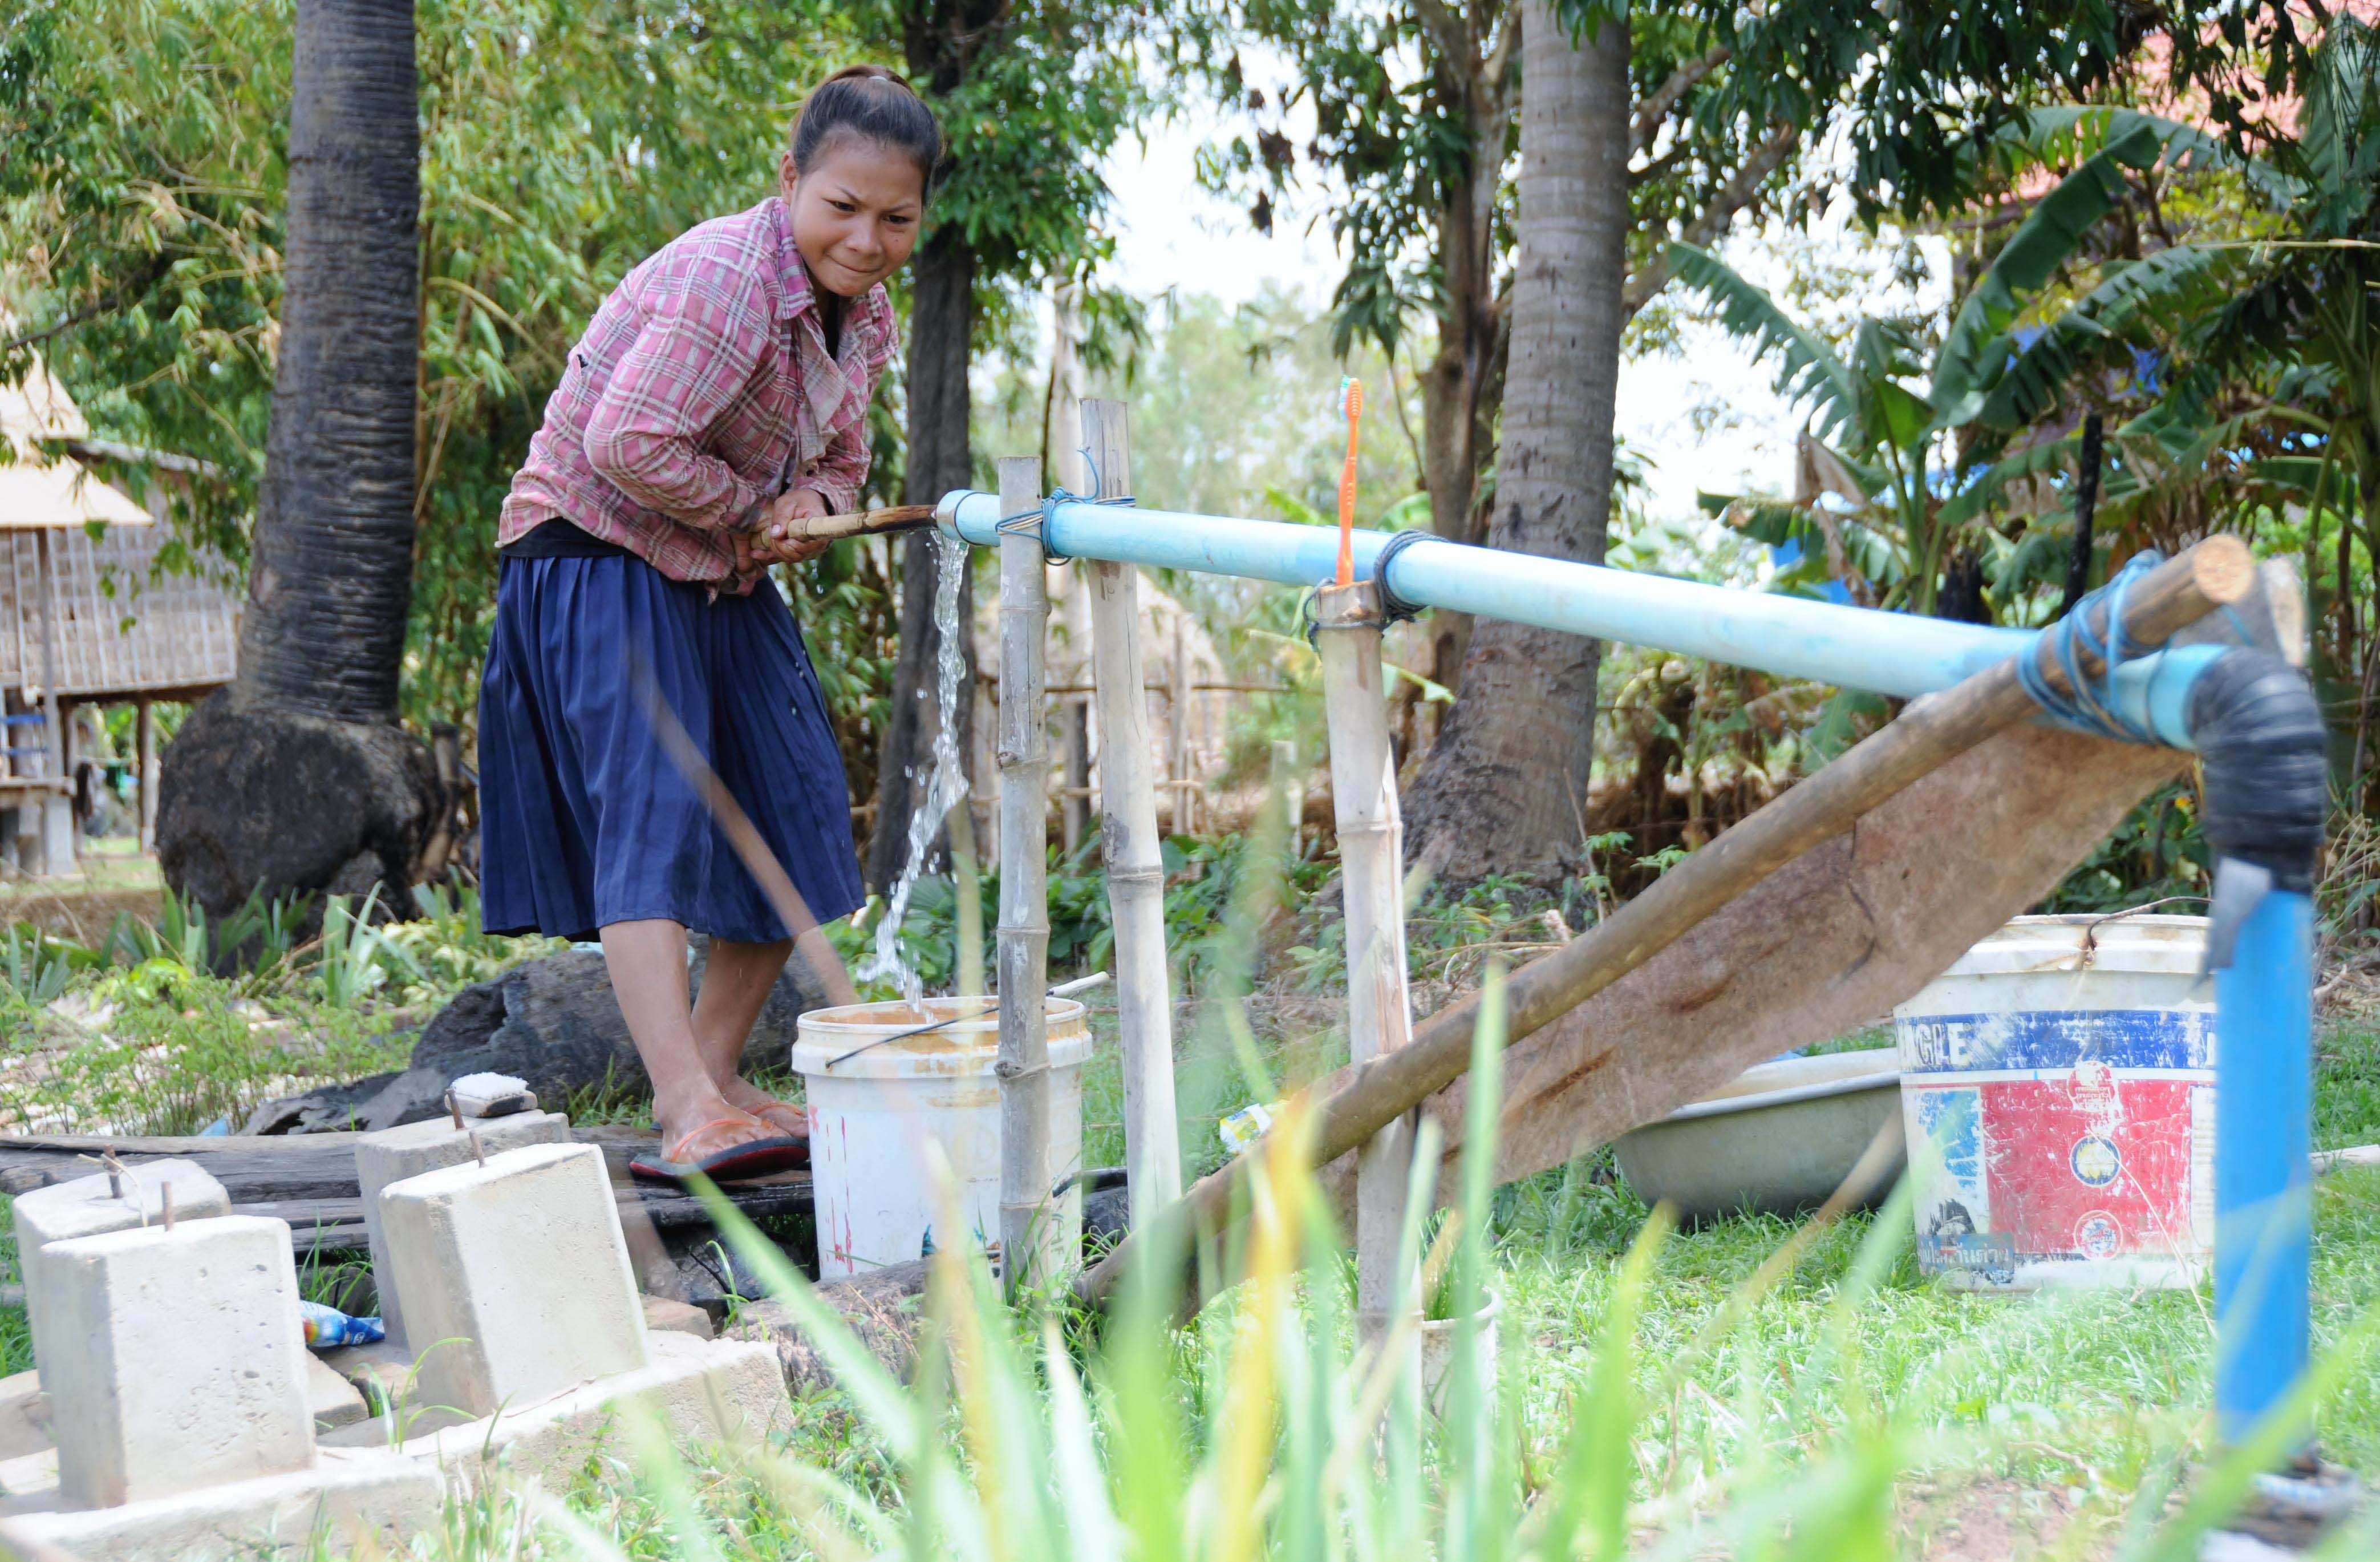 Nary, 15-year-old, pumps water for preparing lunch before she goes to work on a construction site, 30 km from Angkor Wat Temple in Siem Reap province in order to keep her younger brother at school.